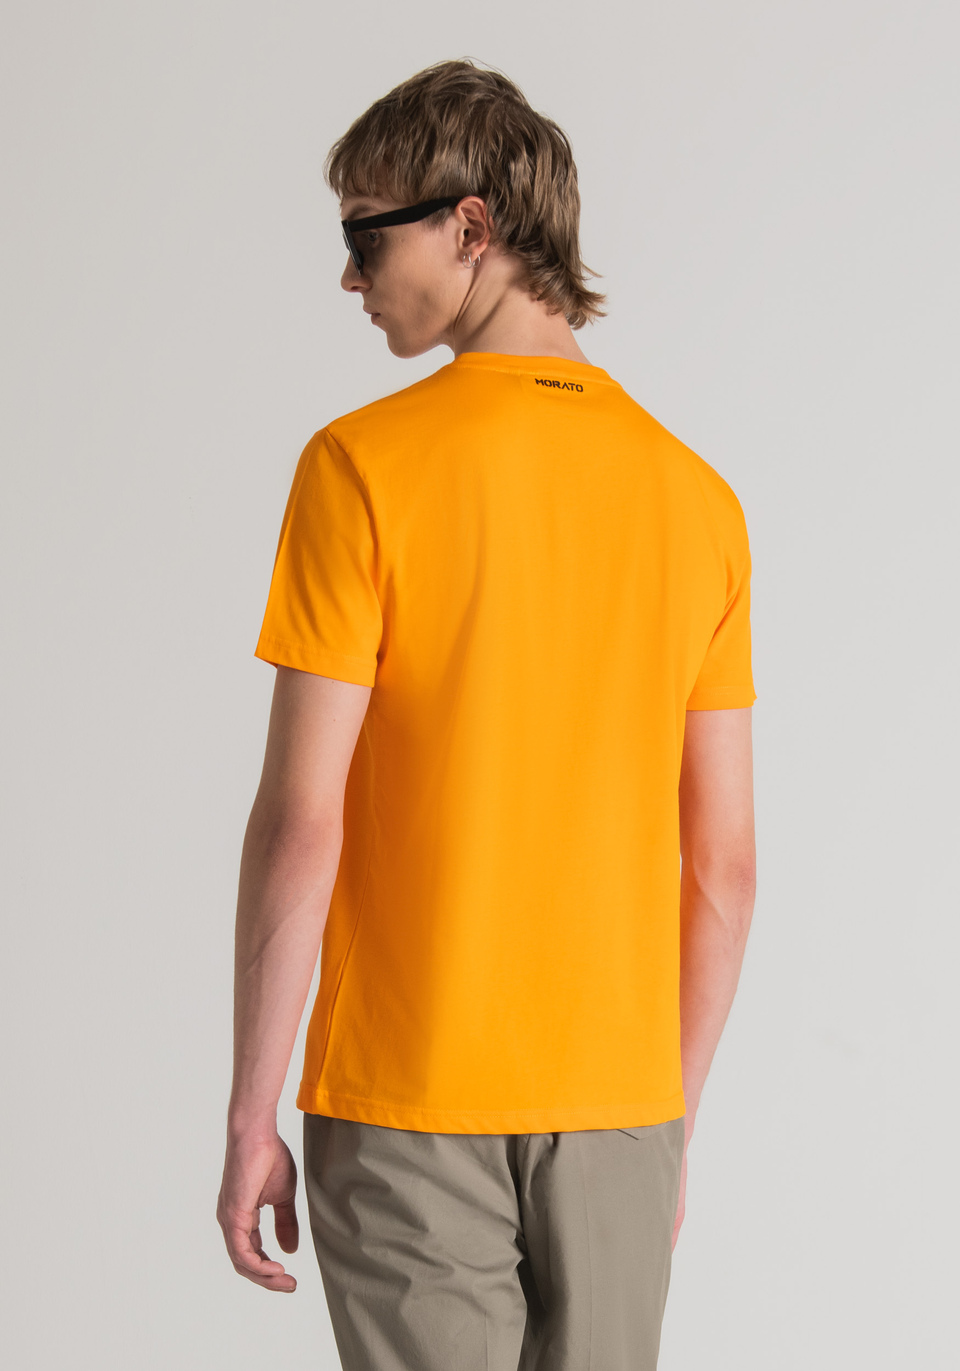 SLIM-FIT T-SHIRT IN SOFT COTTON WITH TIGER PRINT - Antony Morato Online Shop